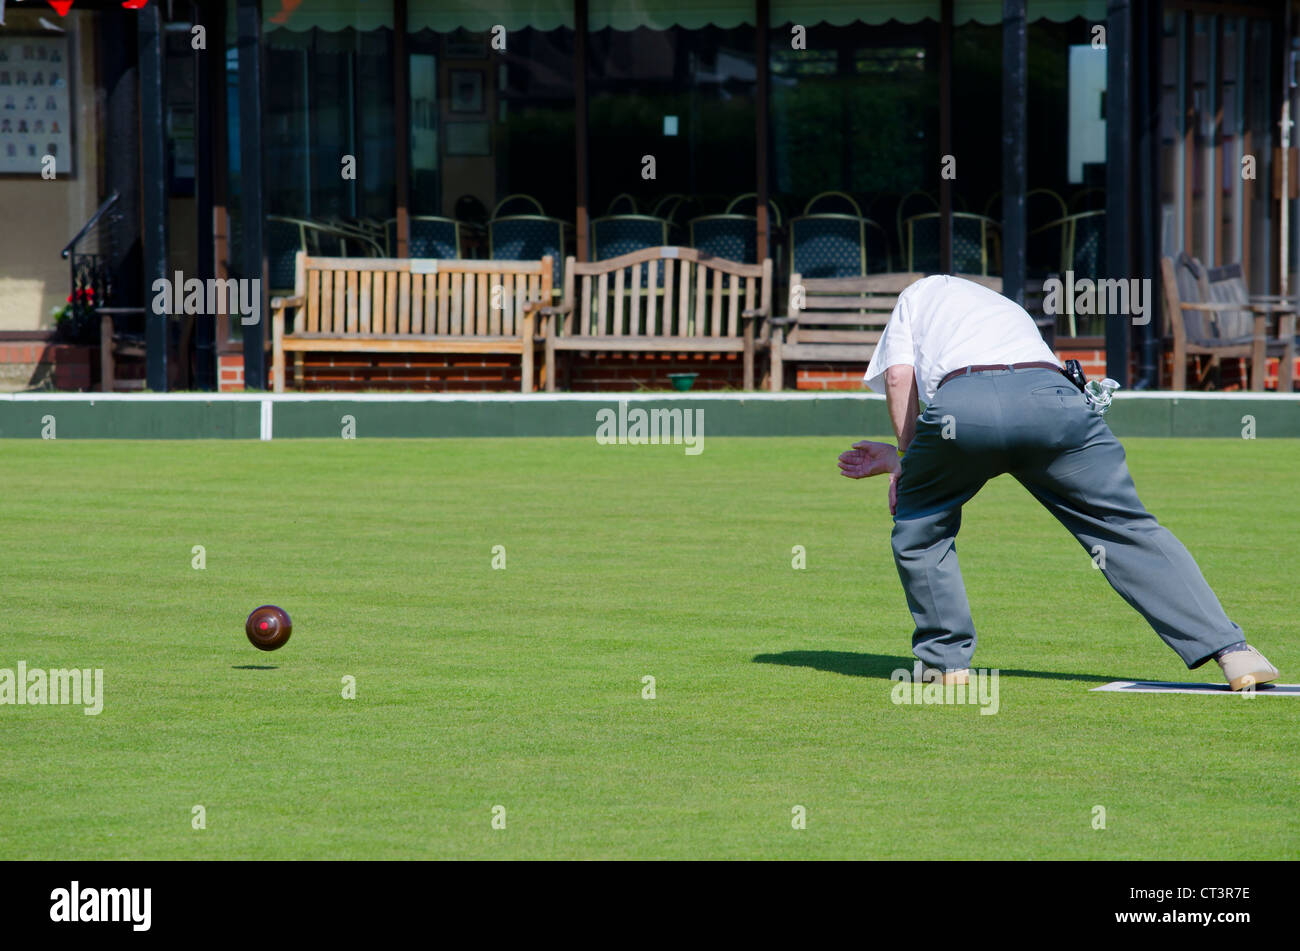 Man on a bowling green Stock Photo